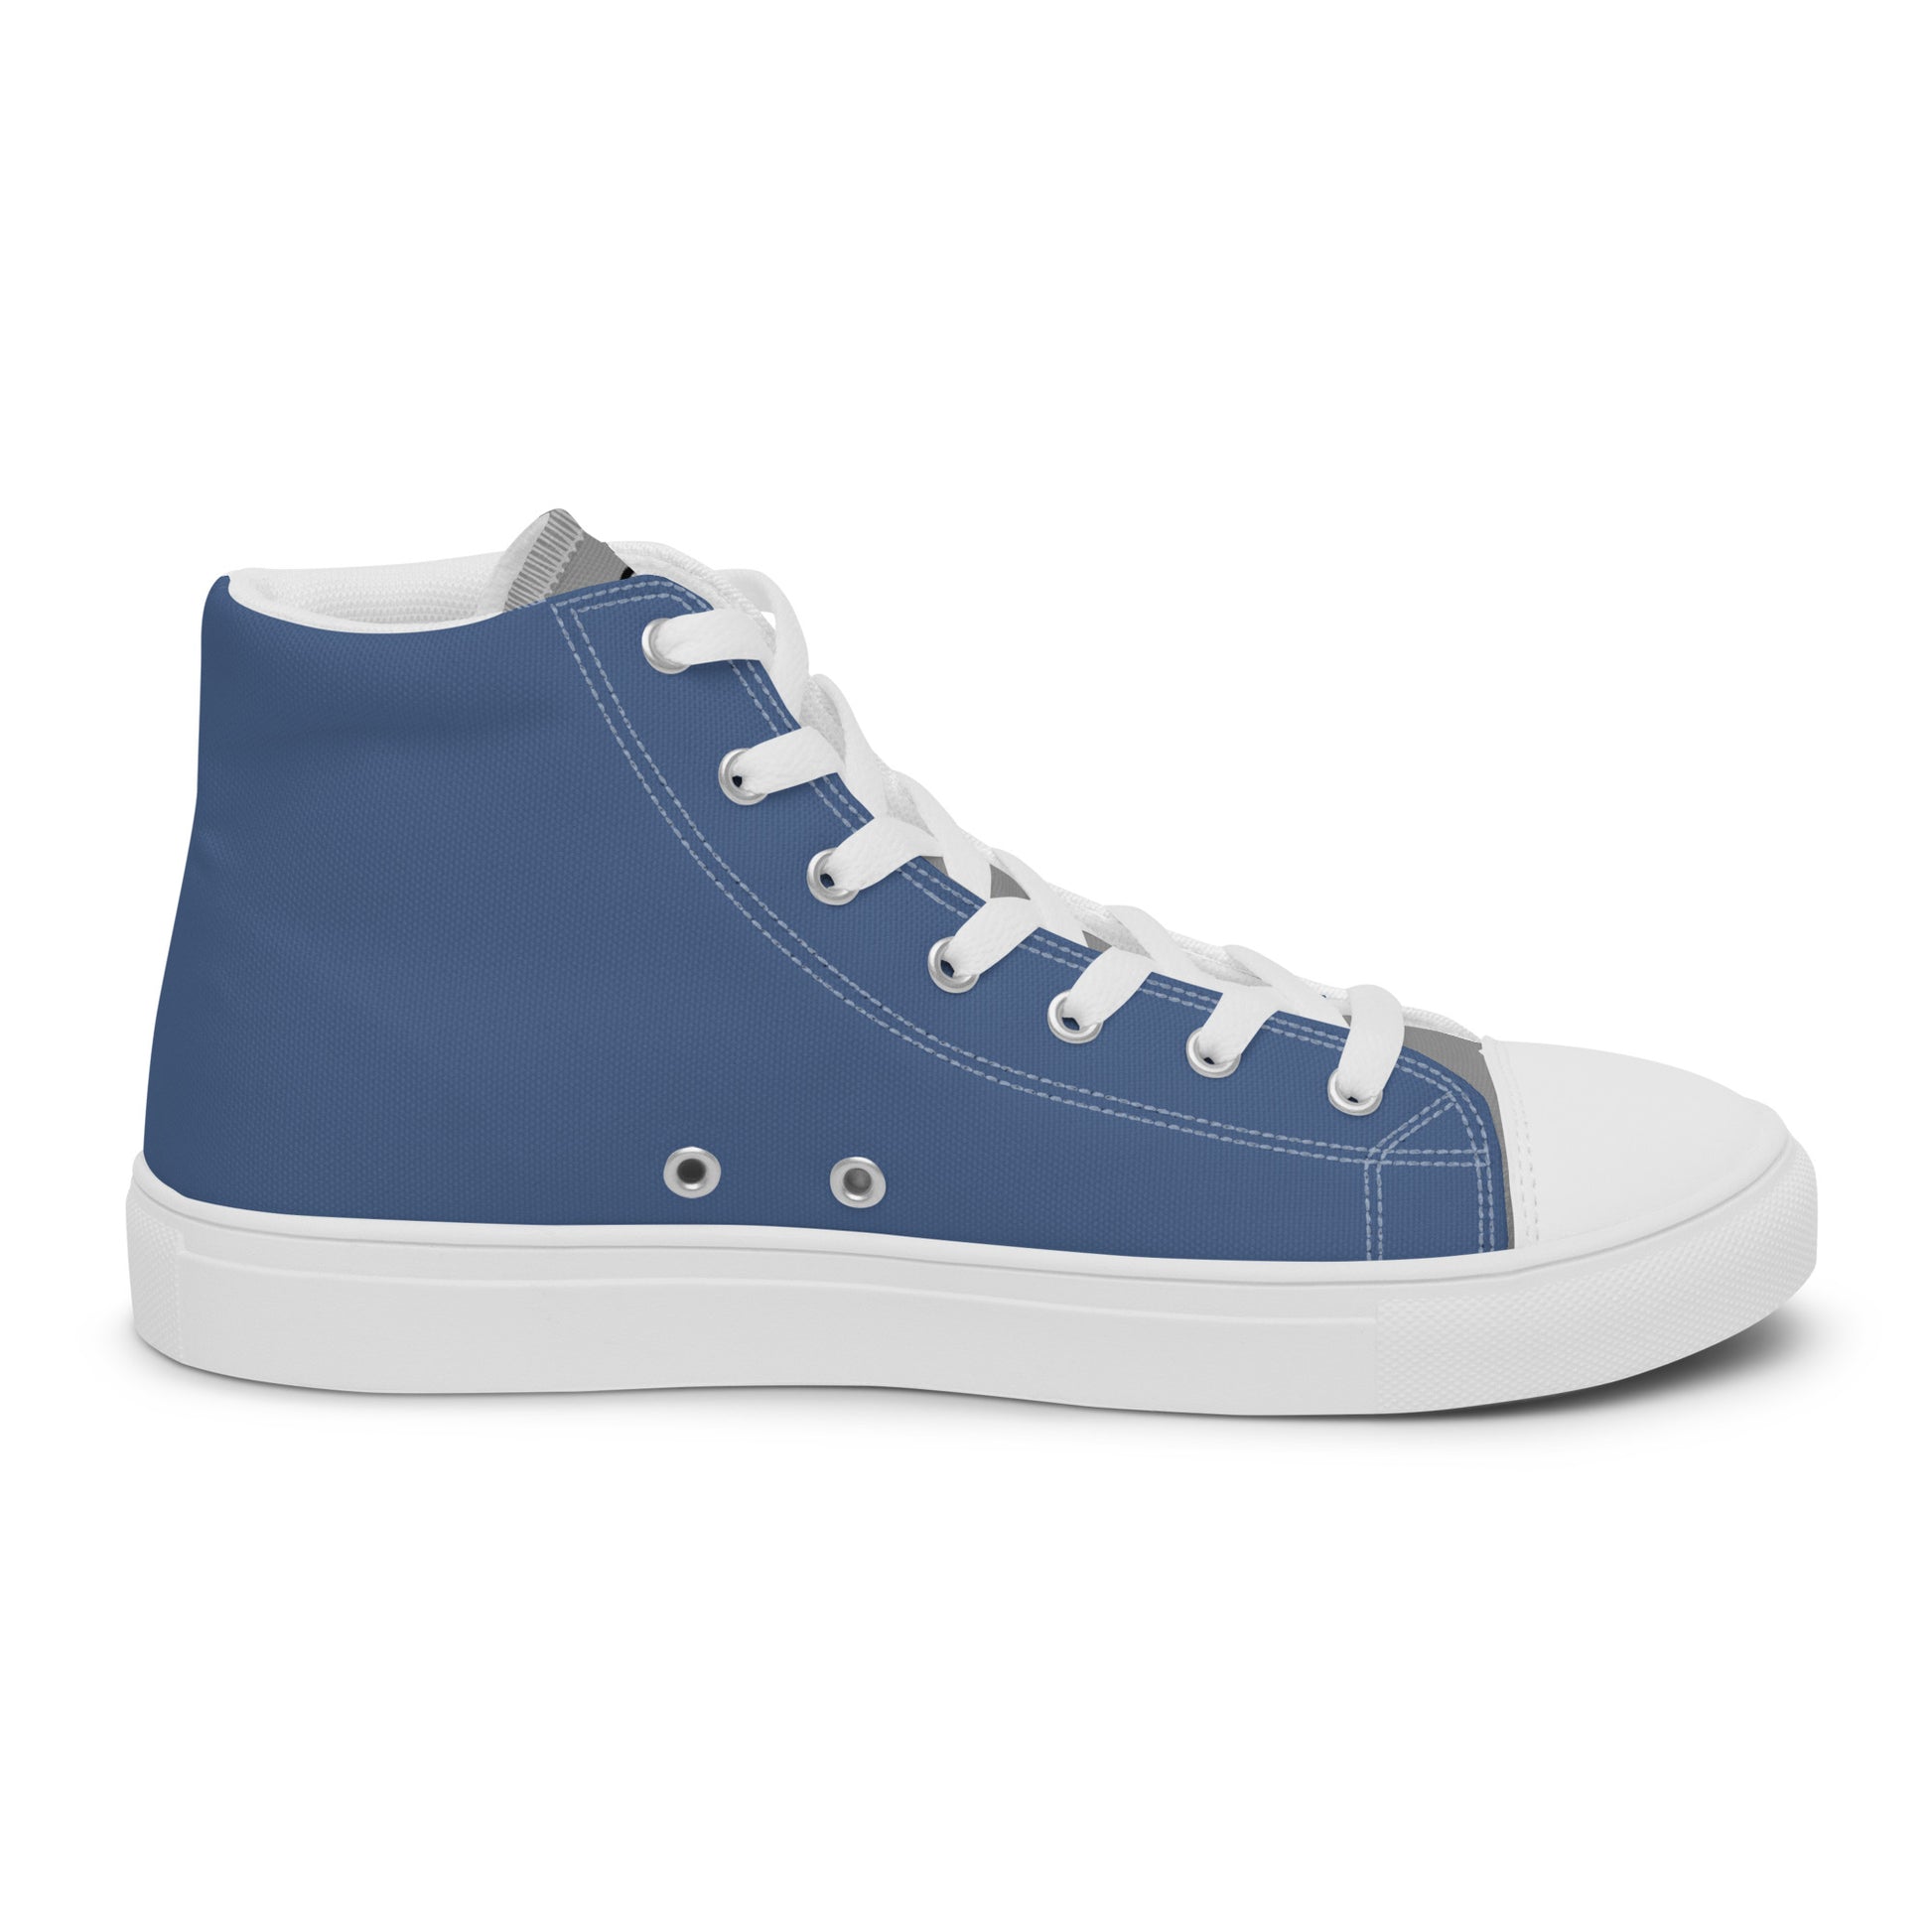 TIME OF VIBES - Women’s High Sneaker CORPORATE - €129.00